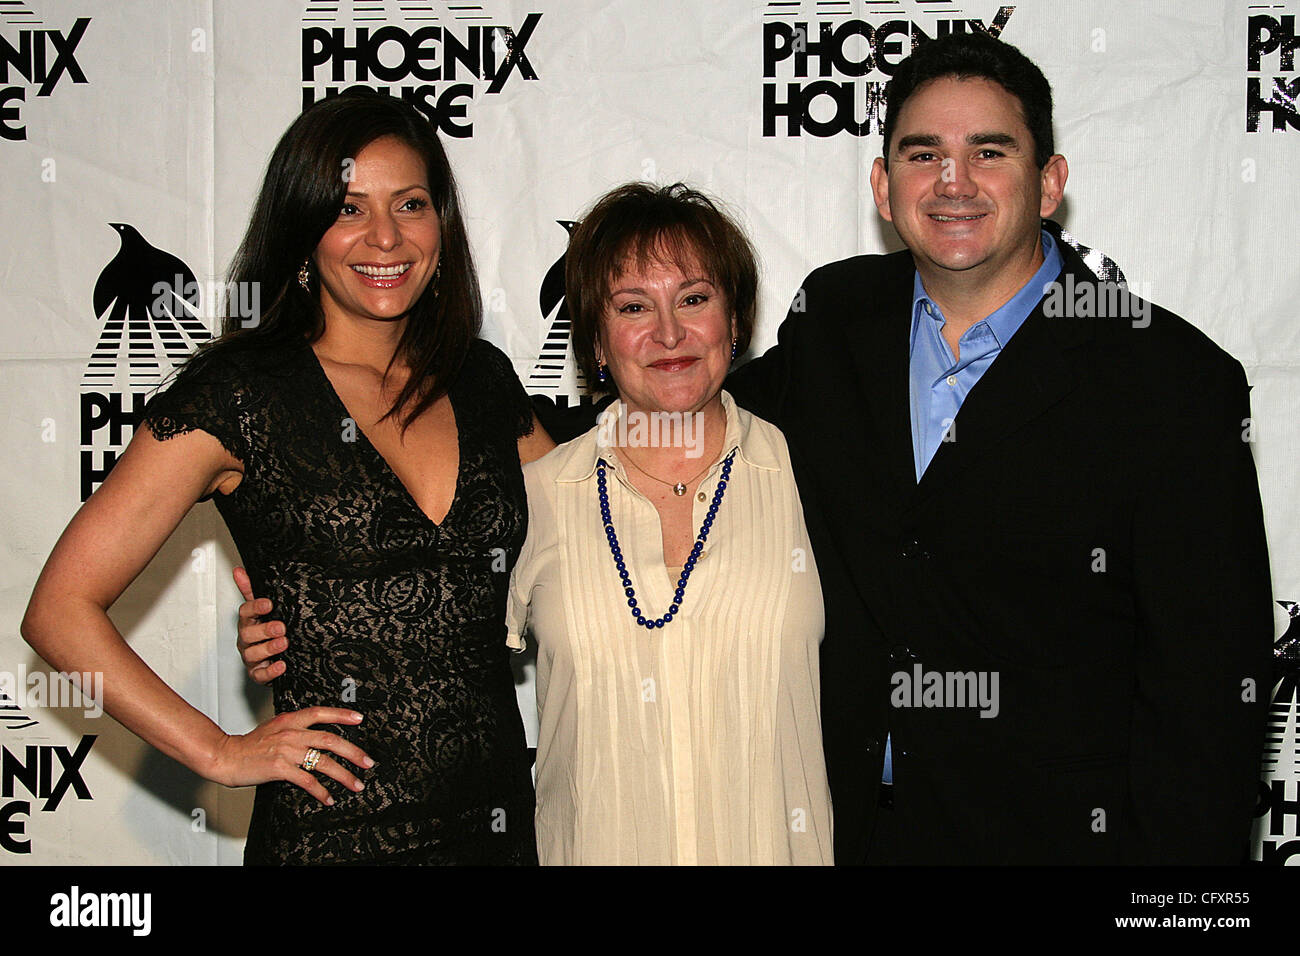 © 2007 Jerome Ware/Zuma Press  Actress CONSTANCE MARIE, BELITA MORENO and VALENTE RODRIGUEZ during arrivals at the 4th Annual Triumph For Teens Awards Gala held at the Four Seasons Hotel in Beverly Hills, CA.  Wednesday, April 25, 2007 Four Seasons Hotel Beverly Hills, CA Stock Photo